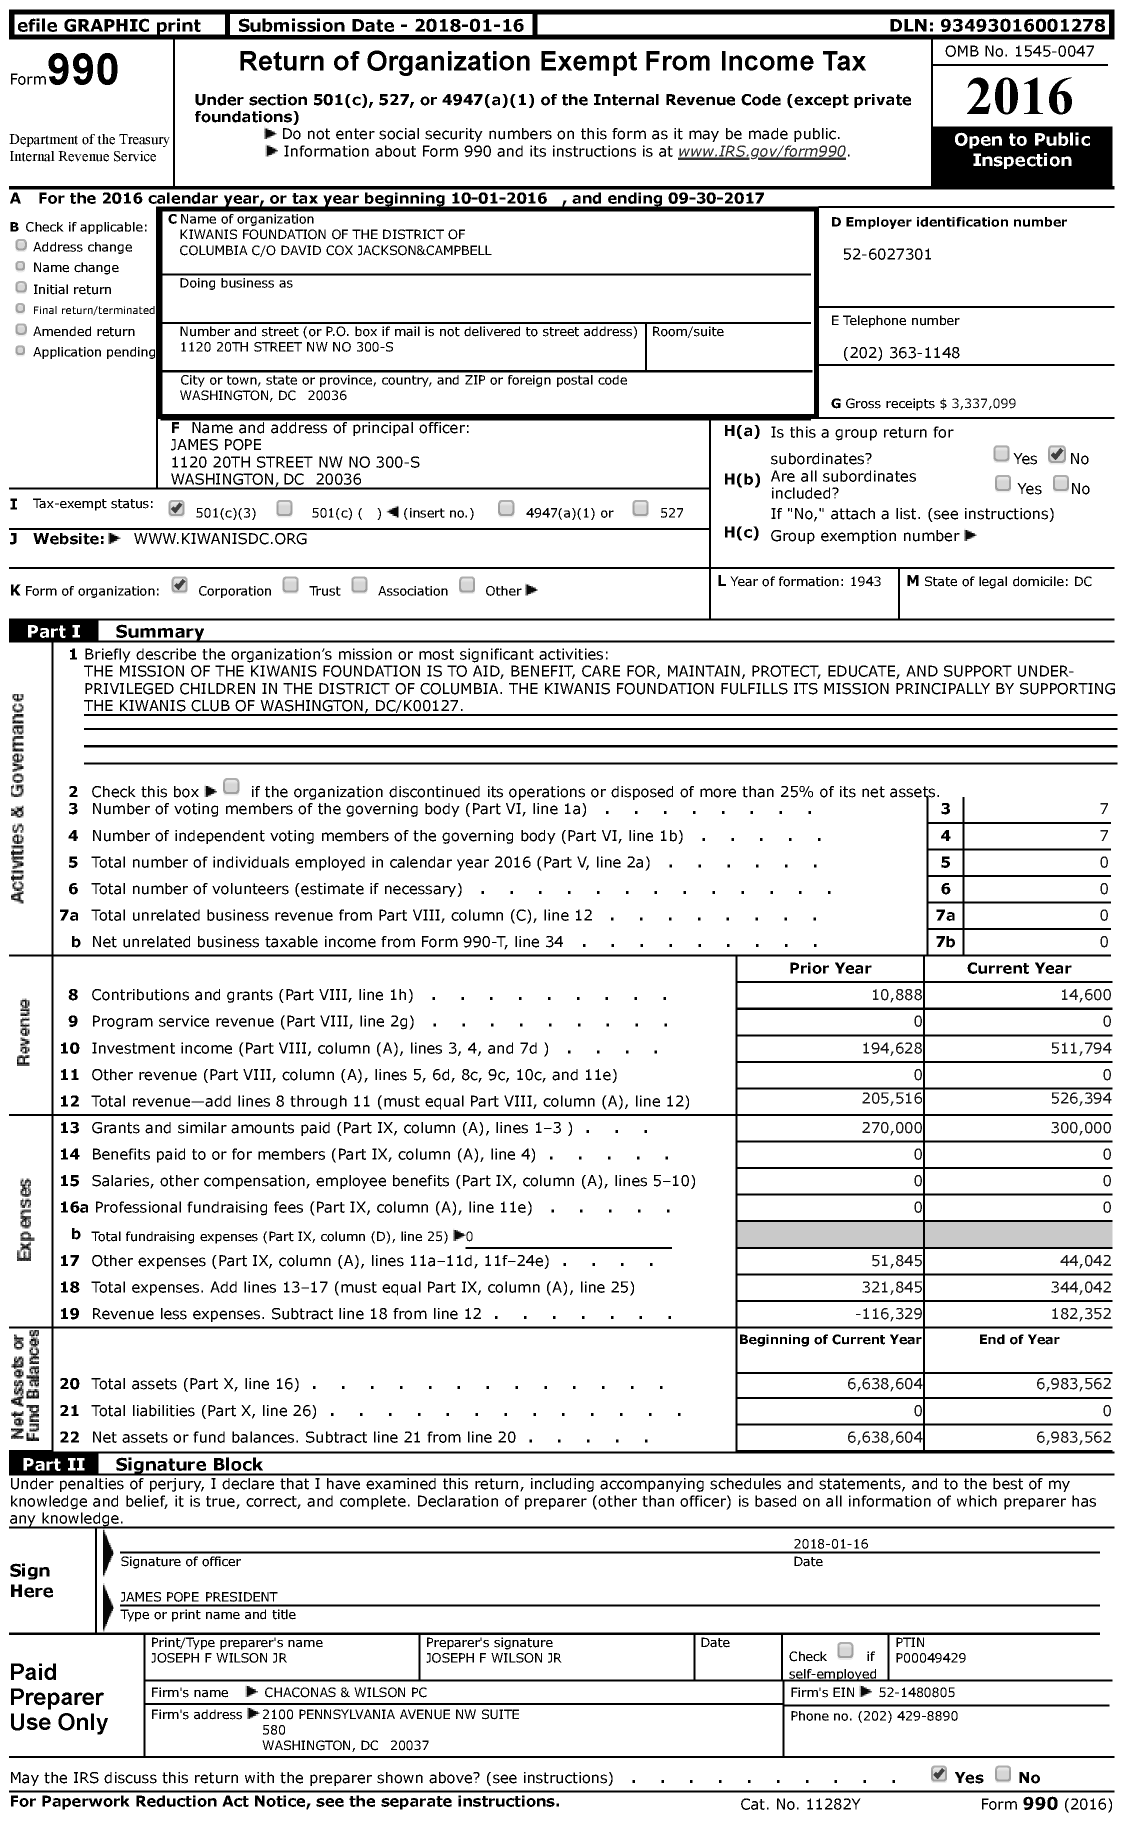 Image of first page of 2016 Form 990 for Kiwanis Foundation of the District of Columbia